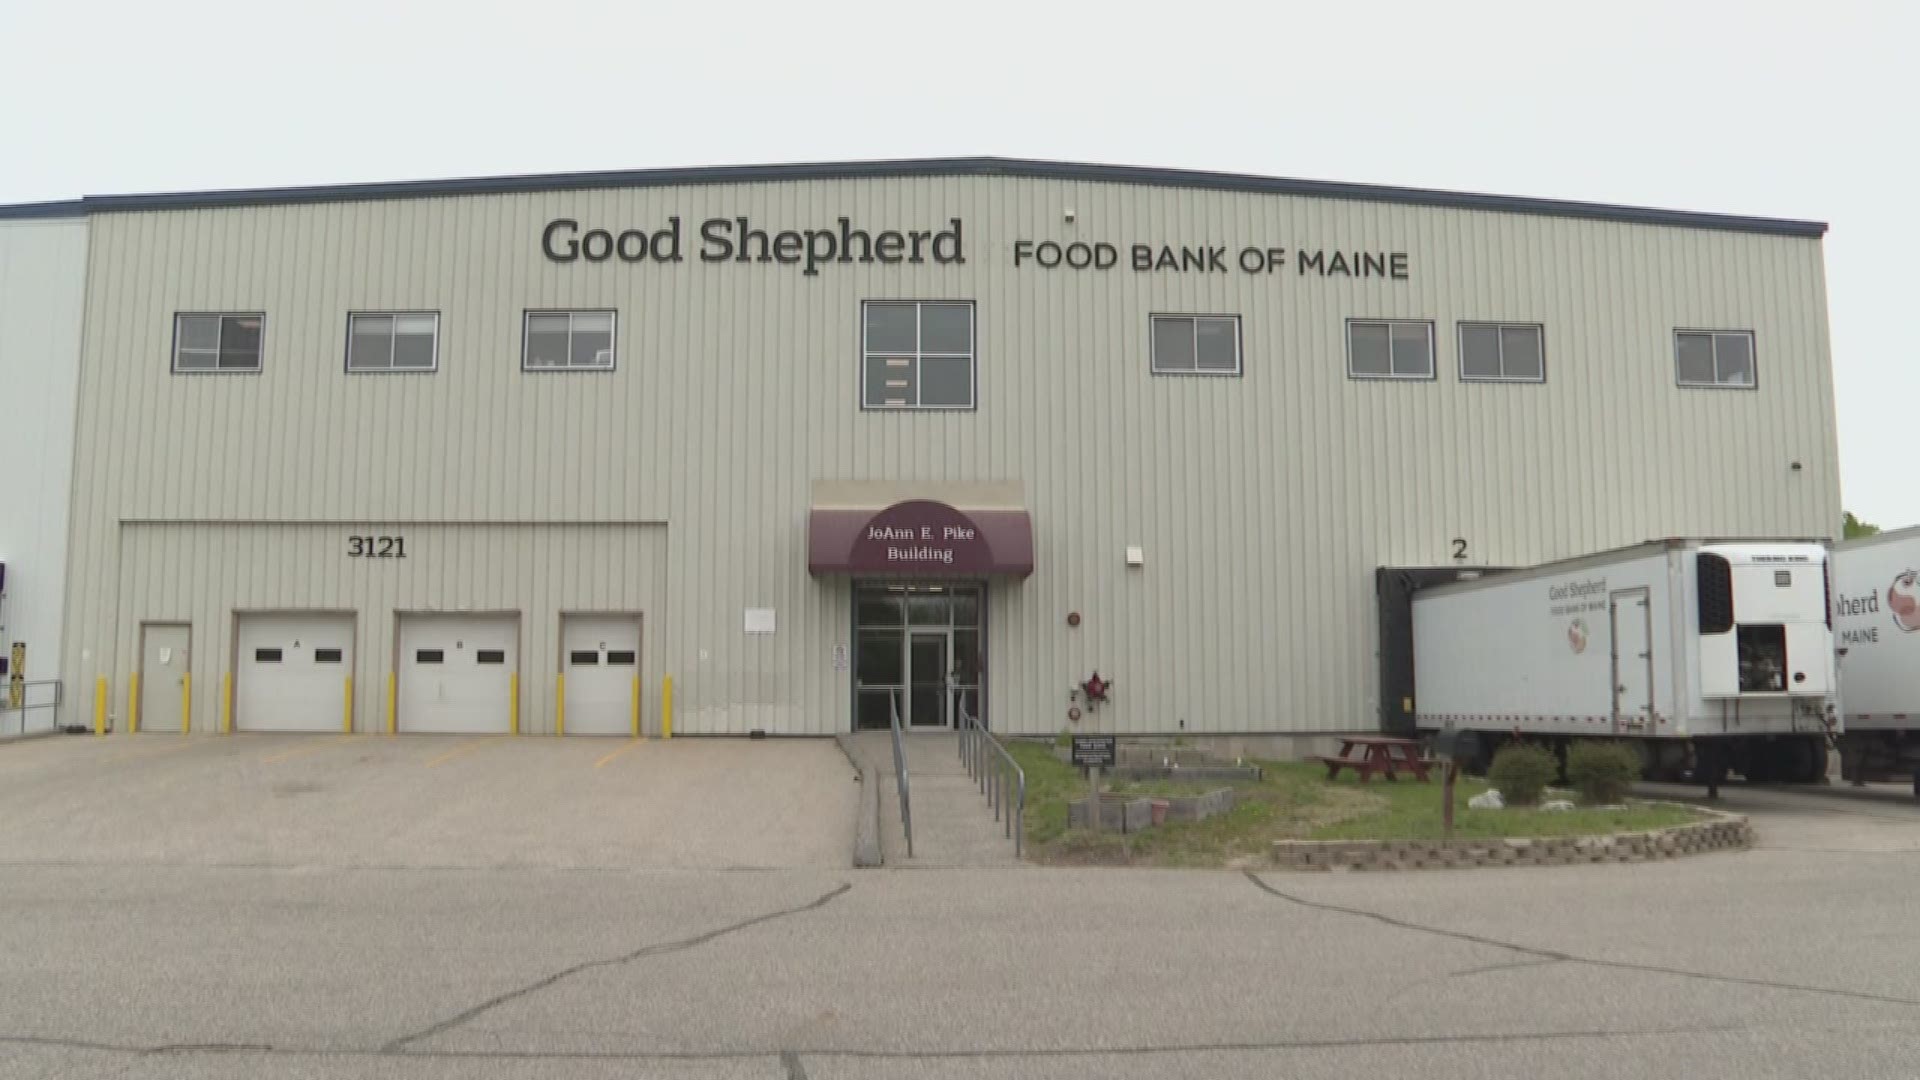 As Good Shepherd Food Bank's funding runs out, farmers and those who use the services could be effected.